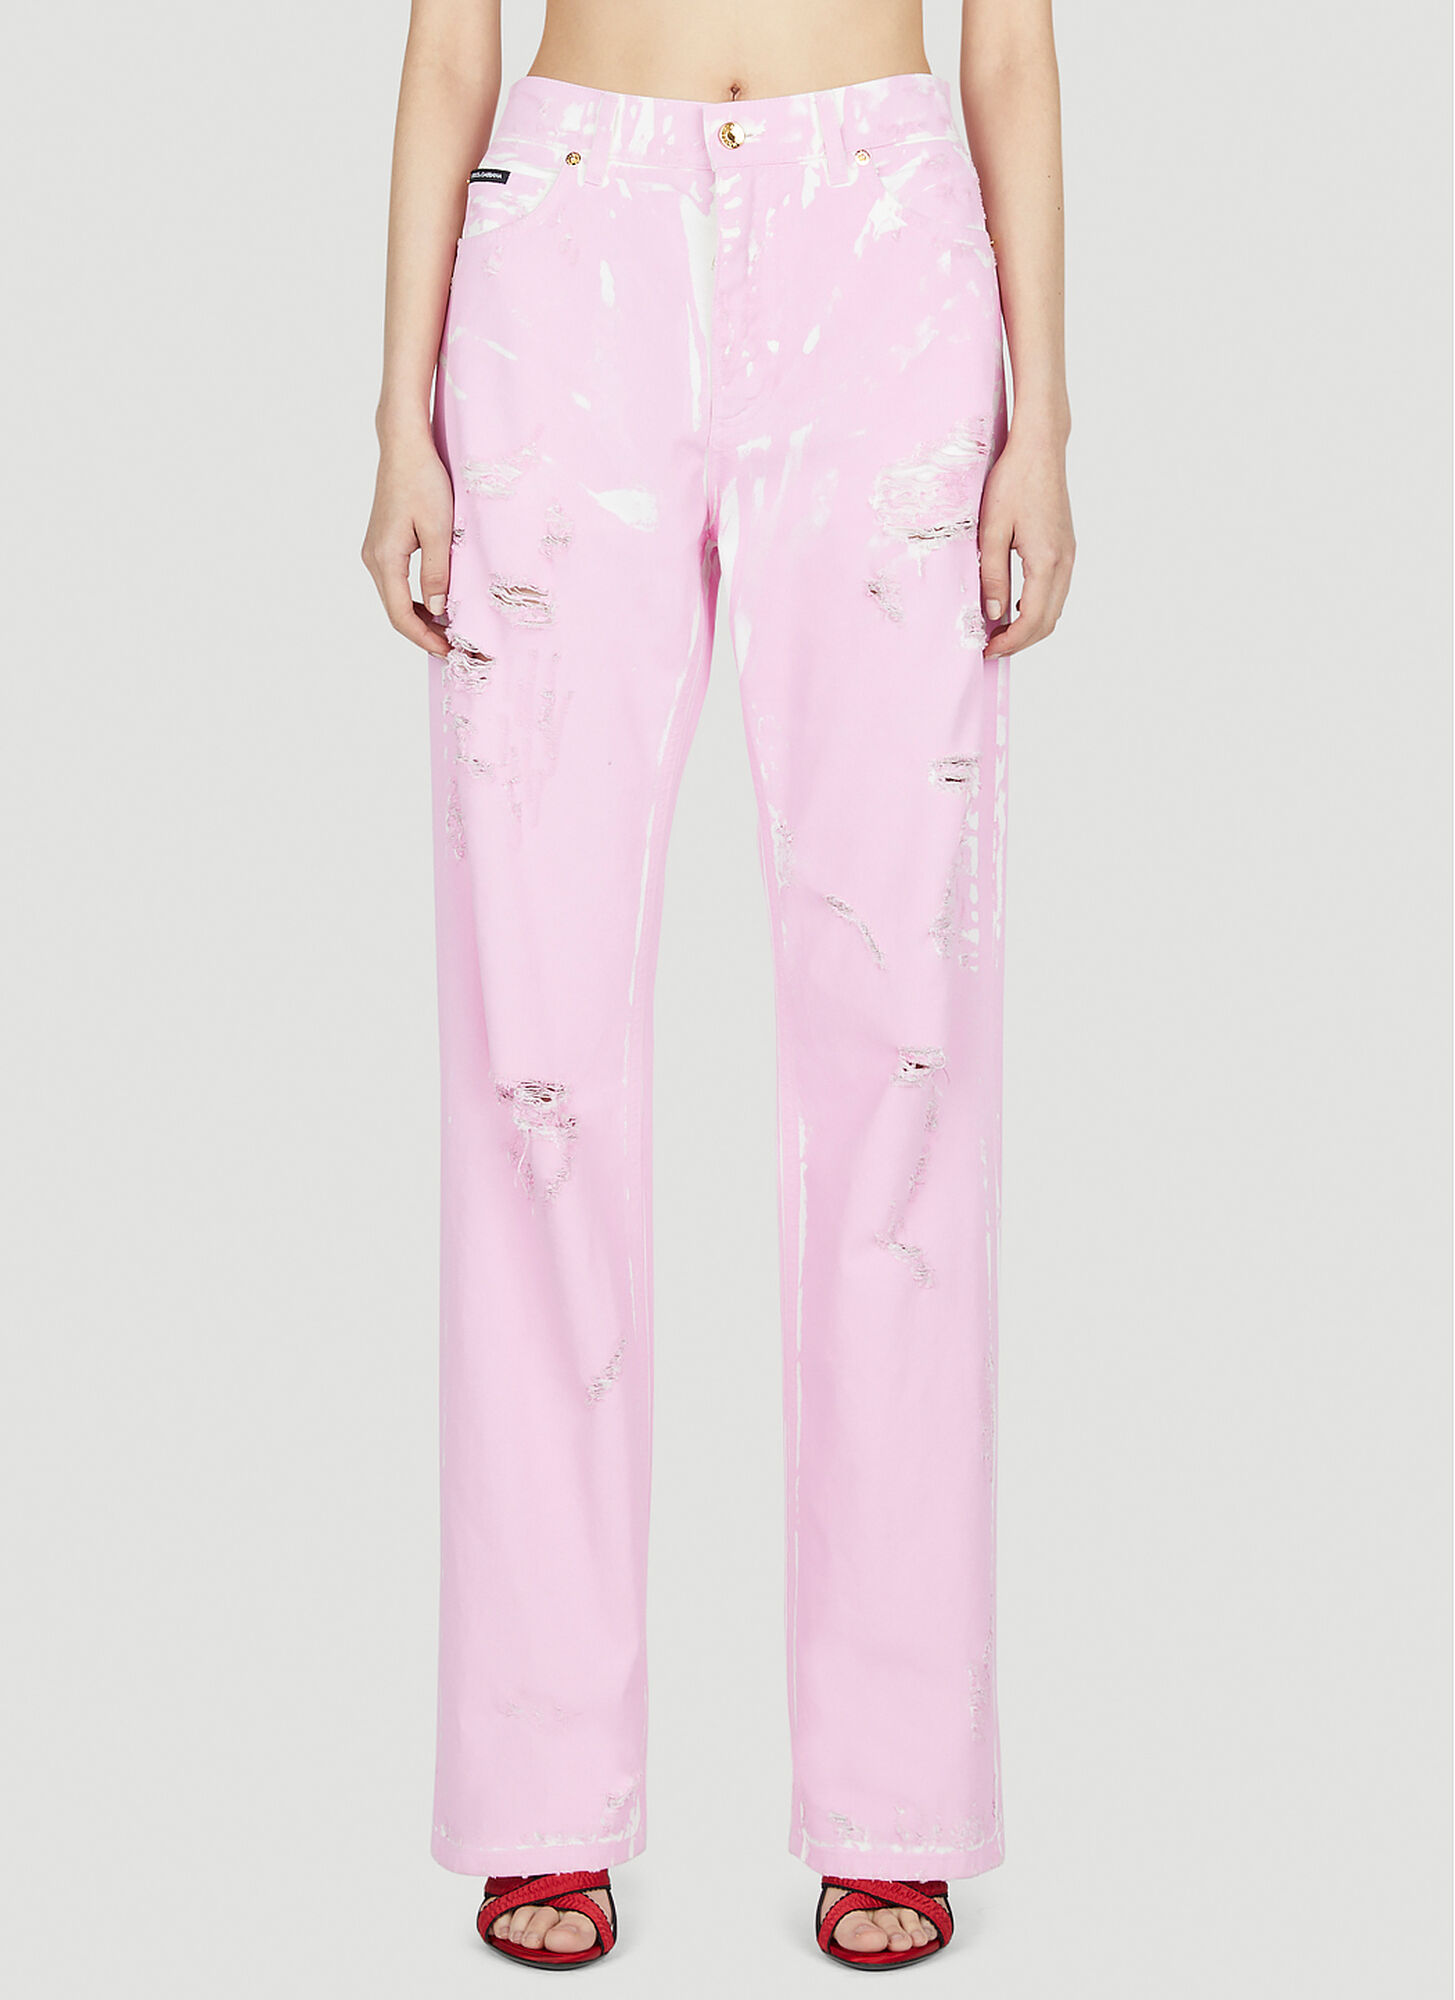 Dolce & Gabbana Distressed Painted Pants